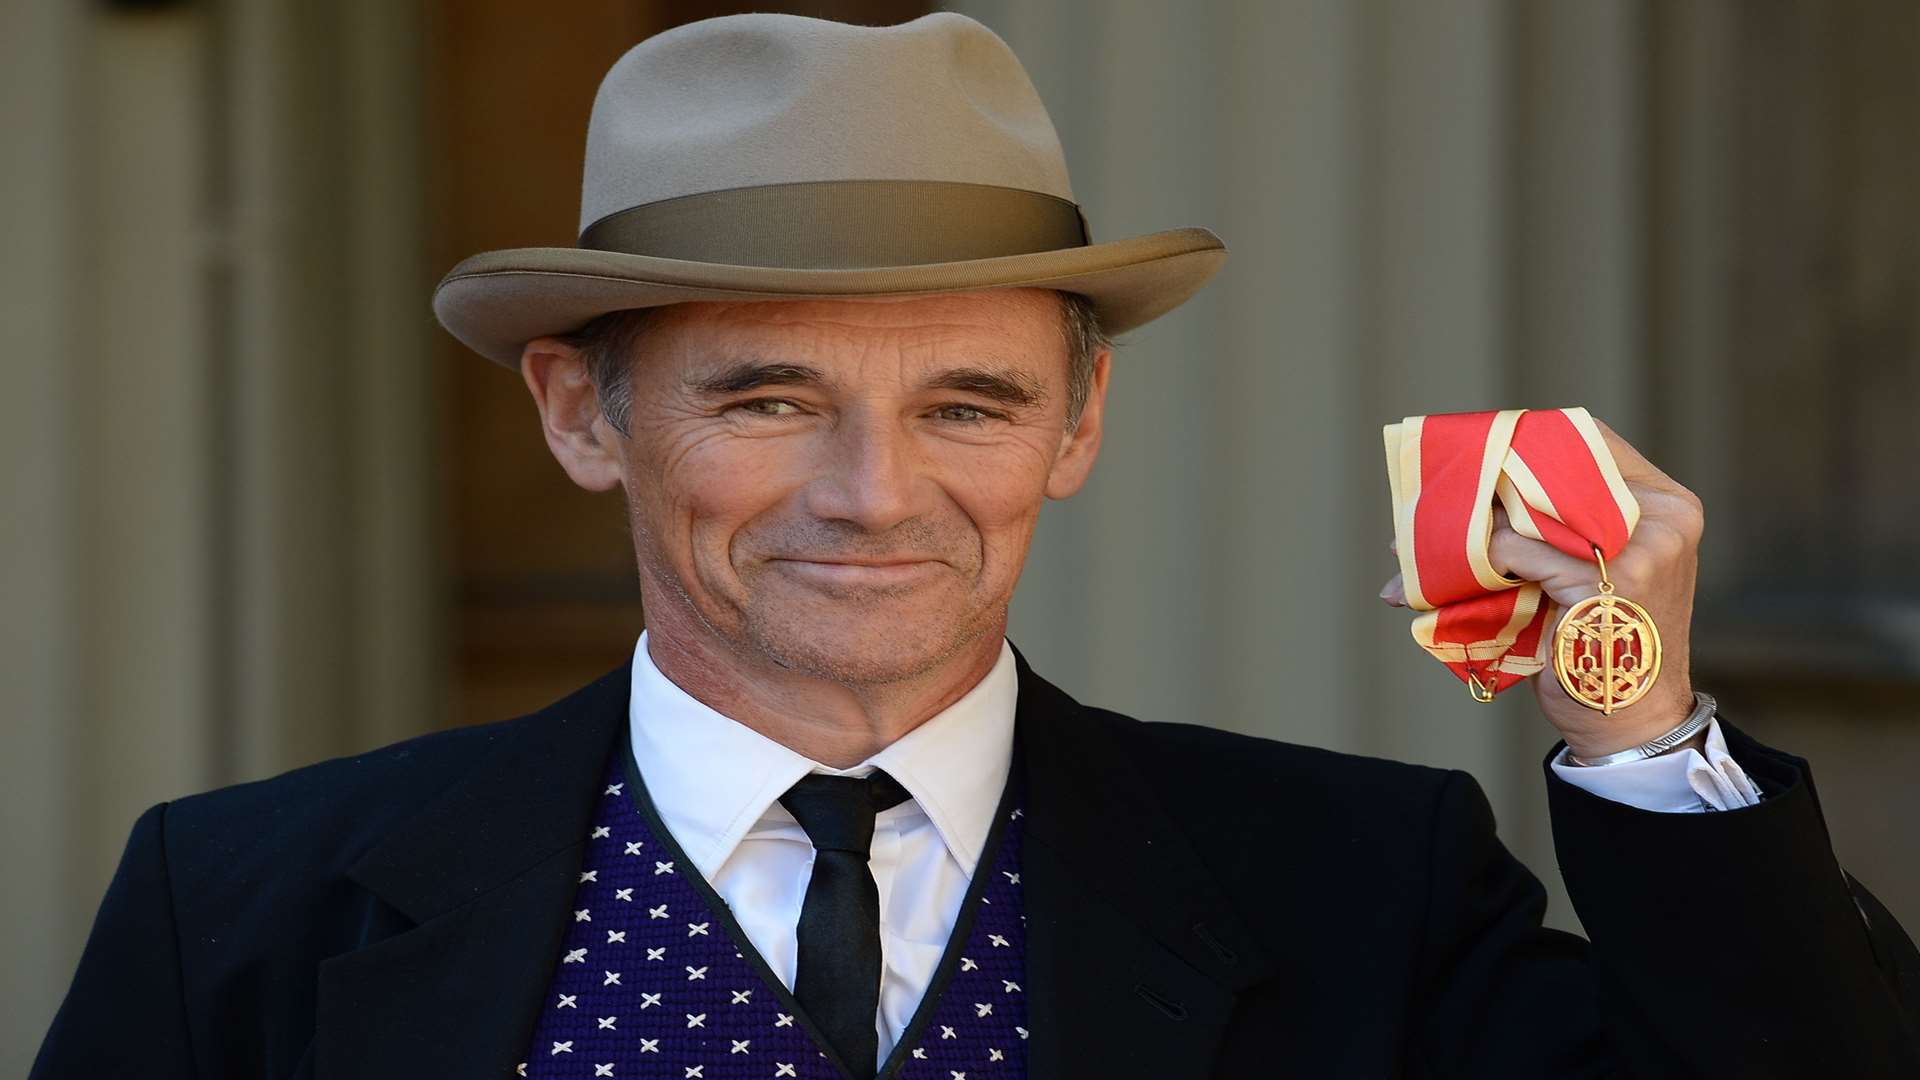 Sir Mark Rylance after he was knighted by the Duke of Cambridge at Buckingham Palace. Picture: John Stillwell/PA Wire